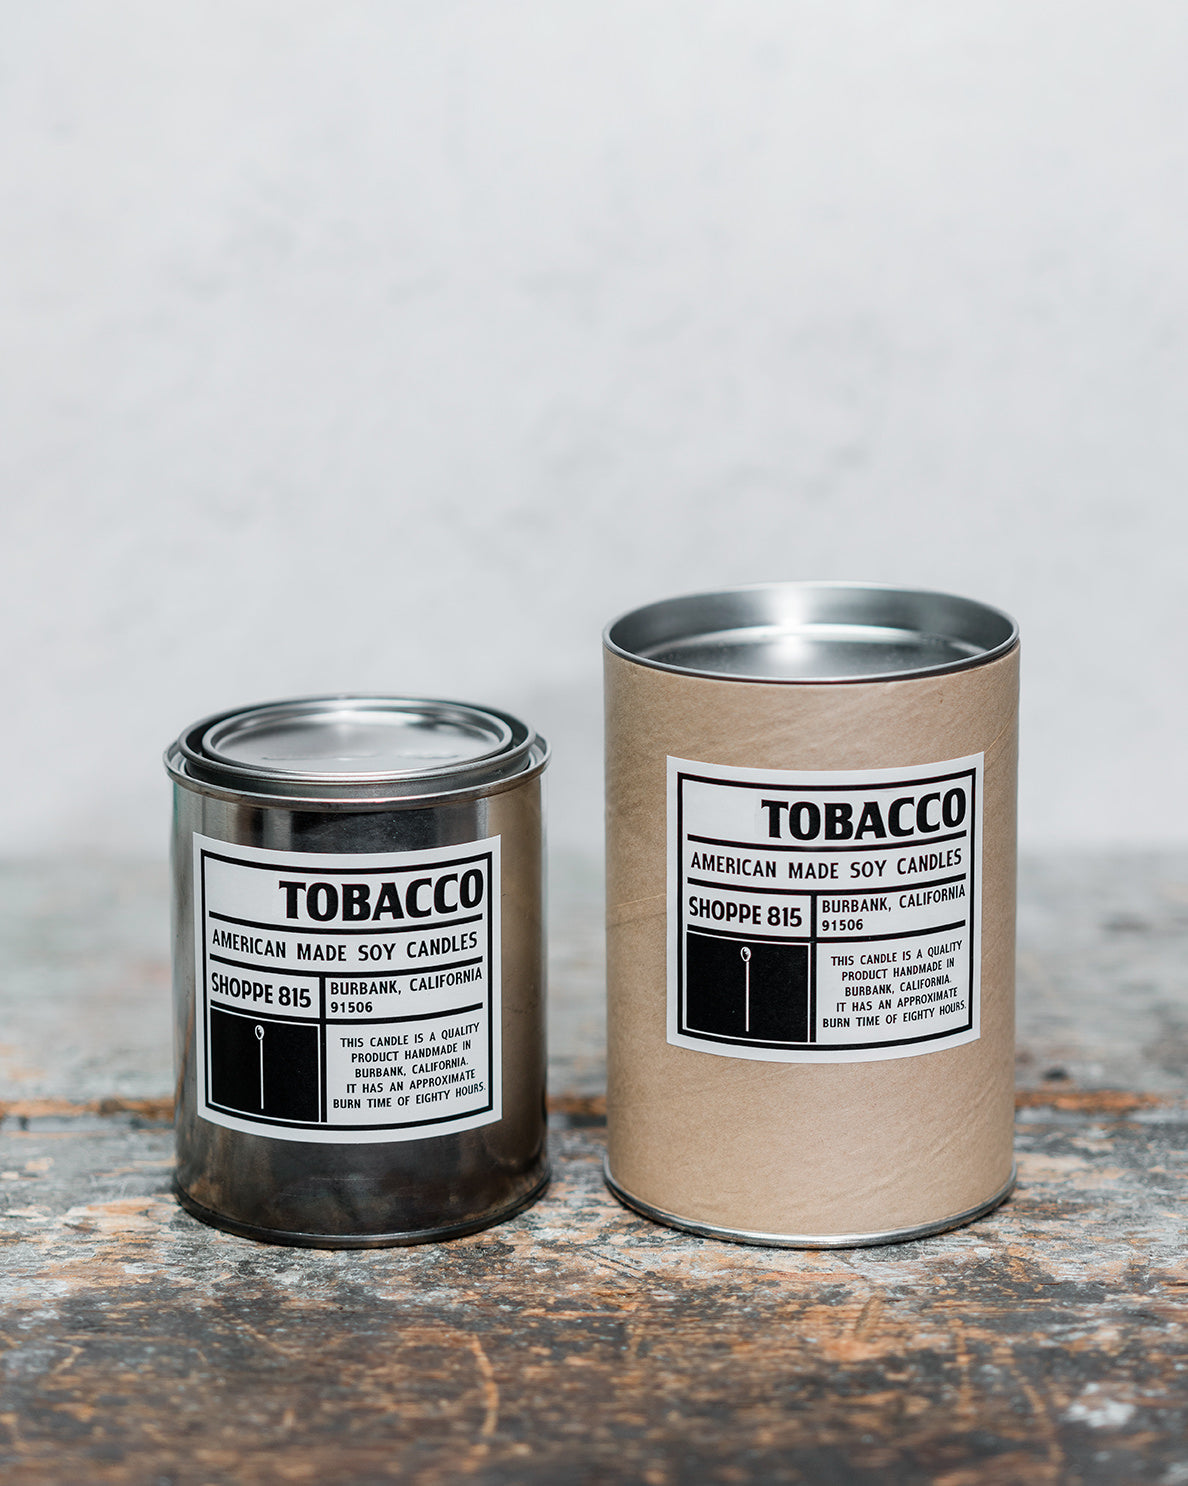 Tobacco gender neutral tin candle on wooden shelf with packaging